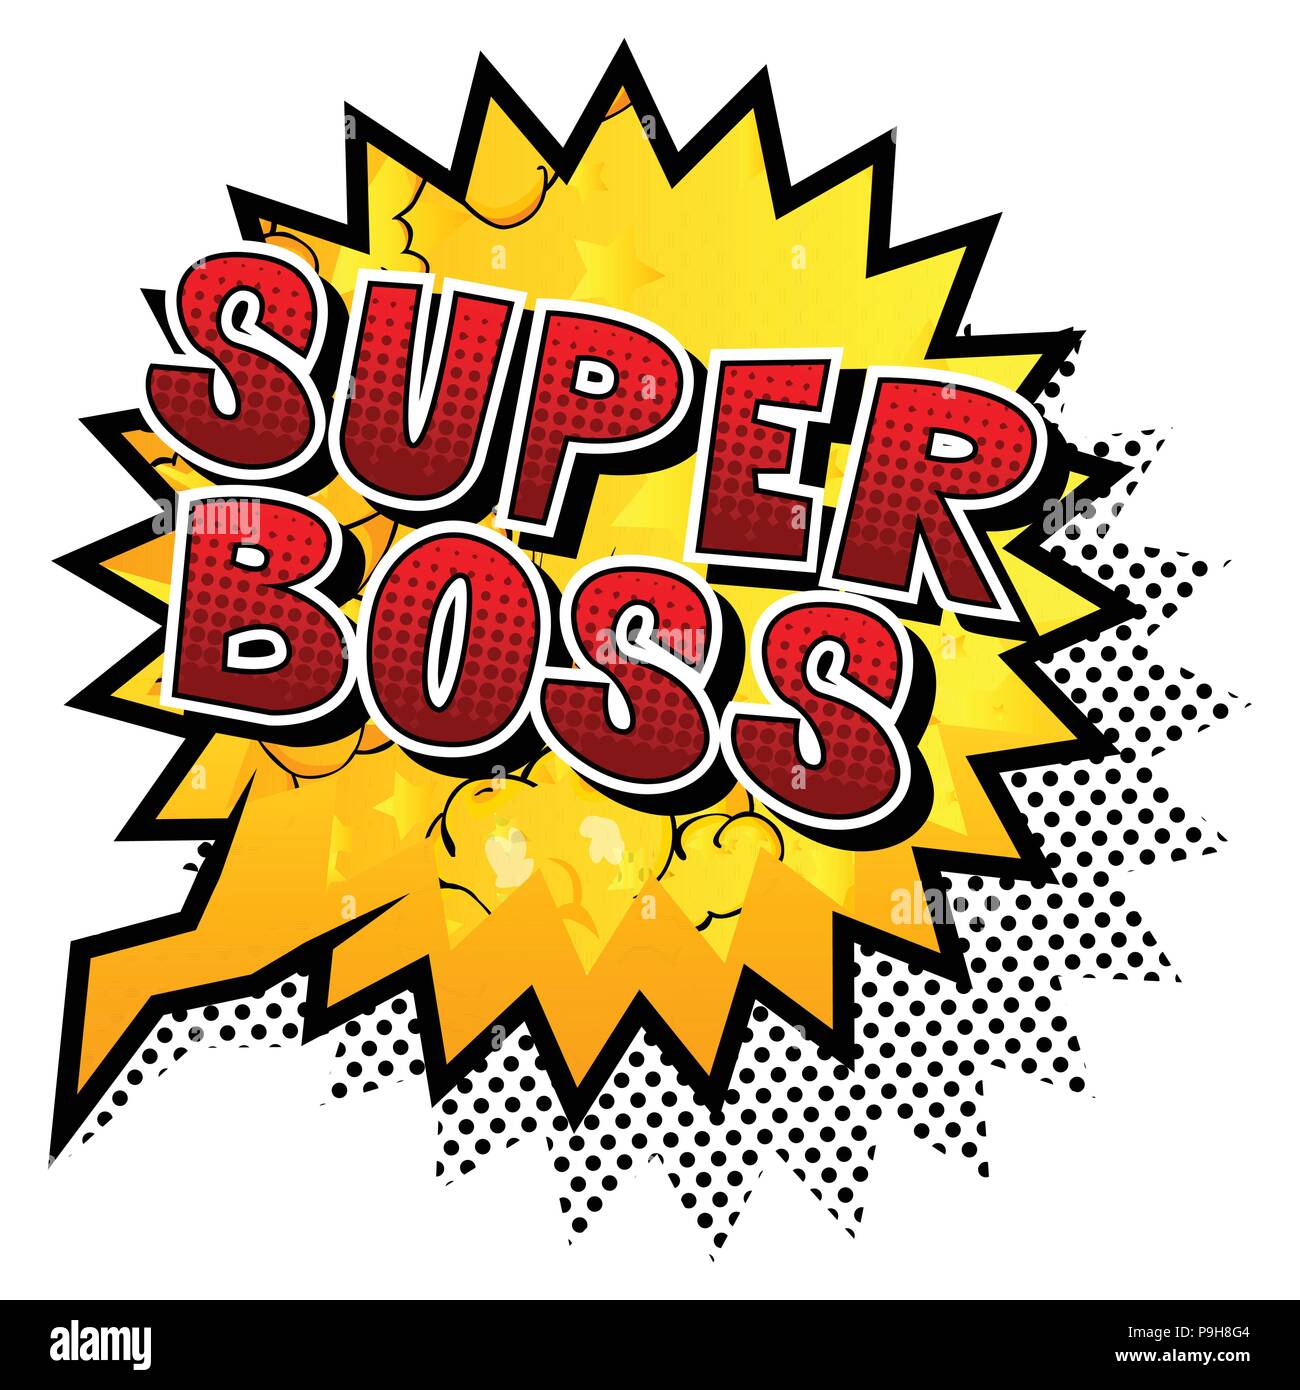 Super boss stock photography images - Alamy